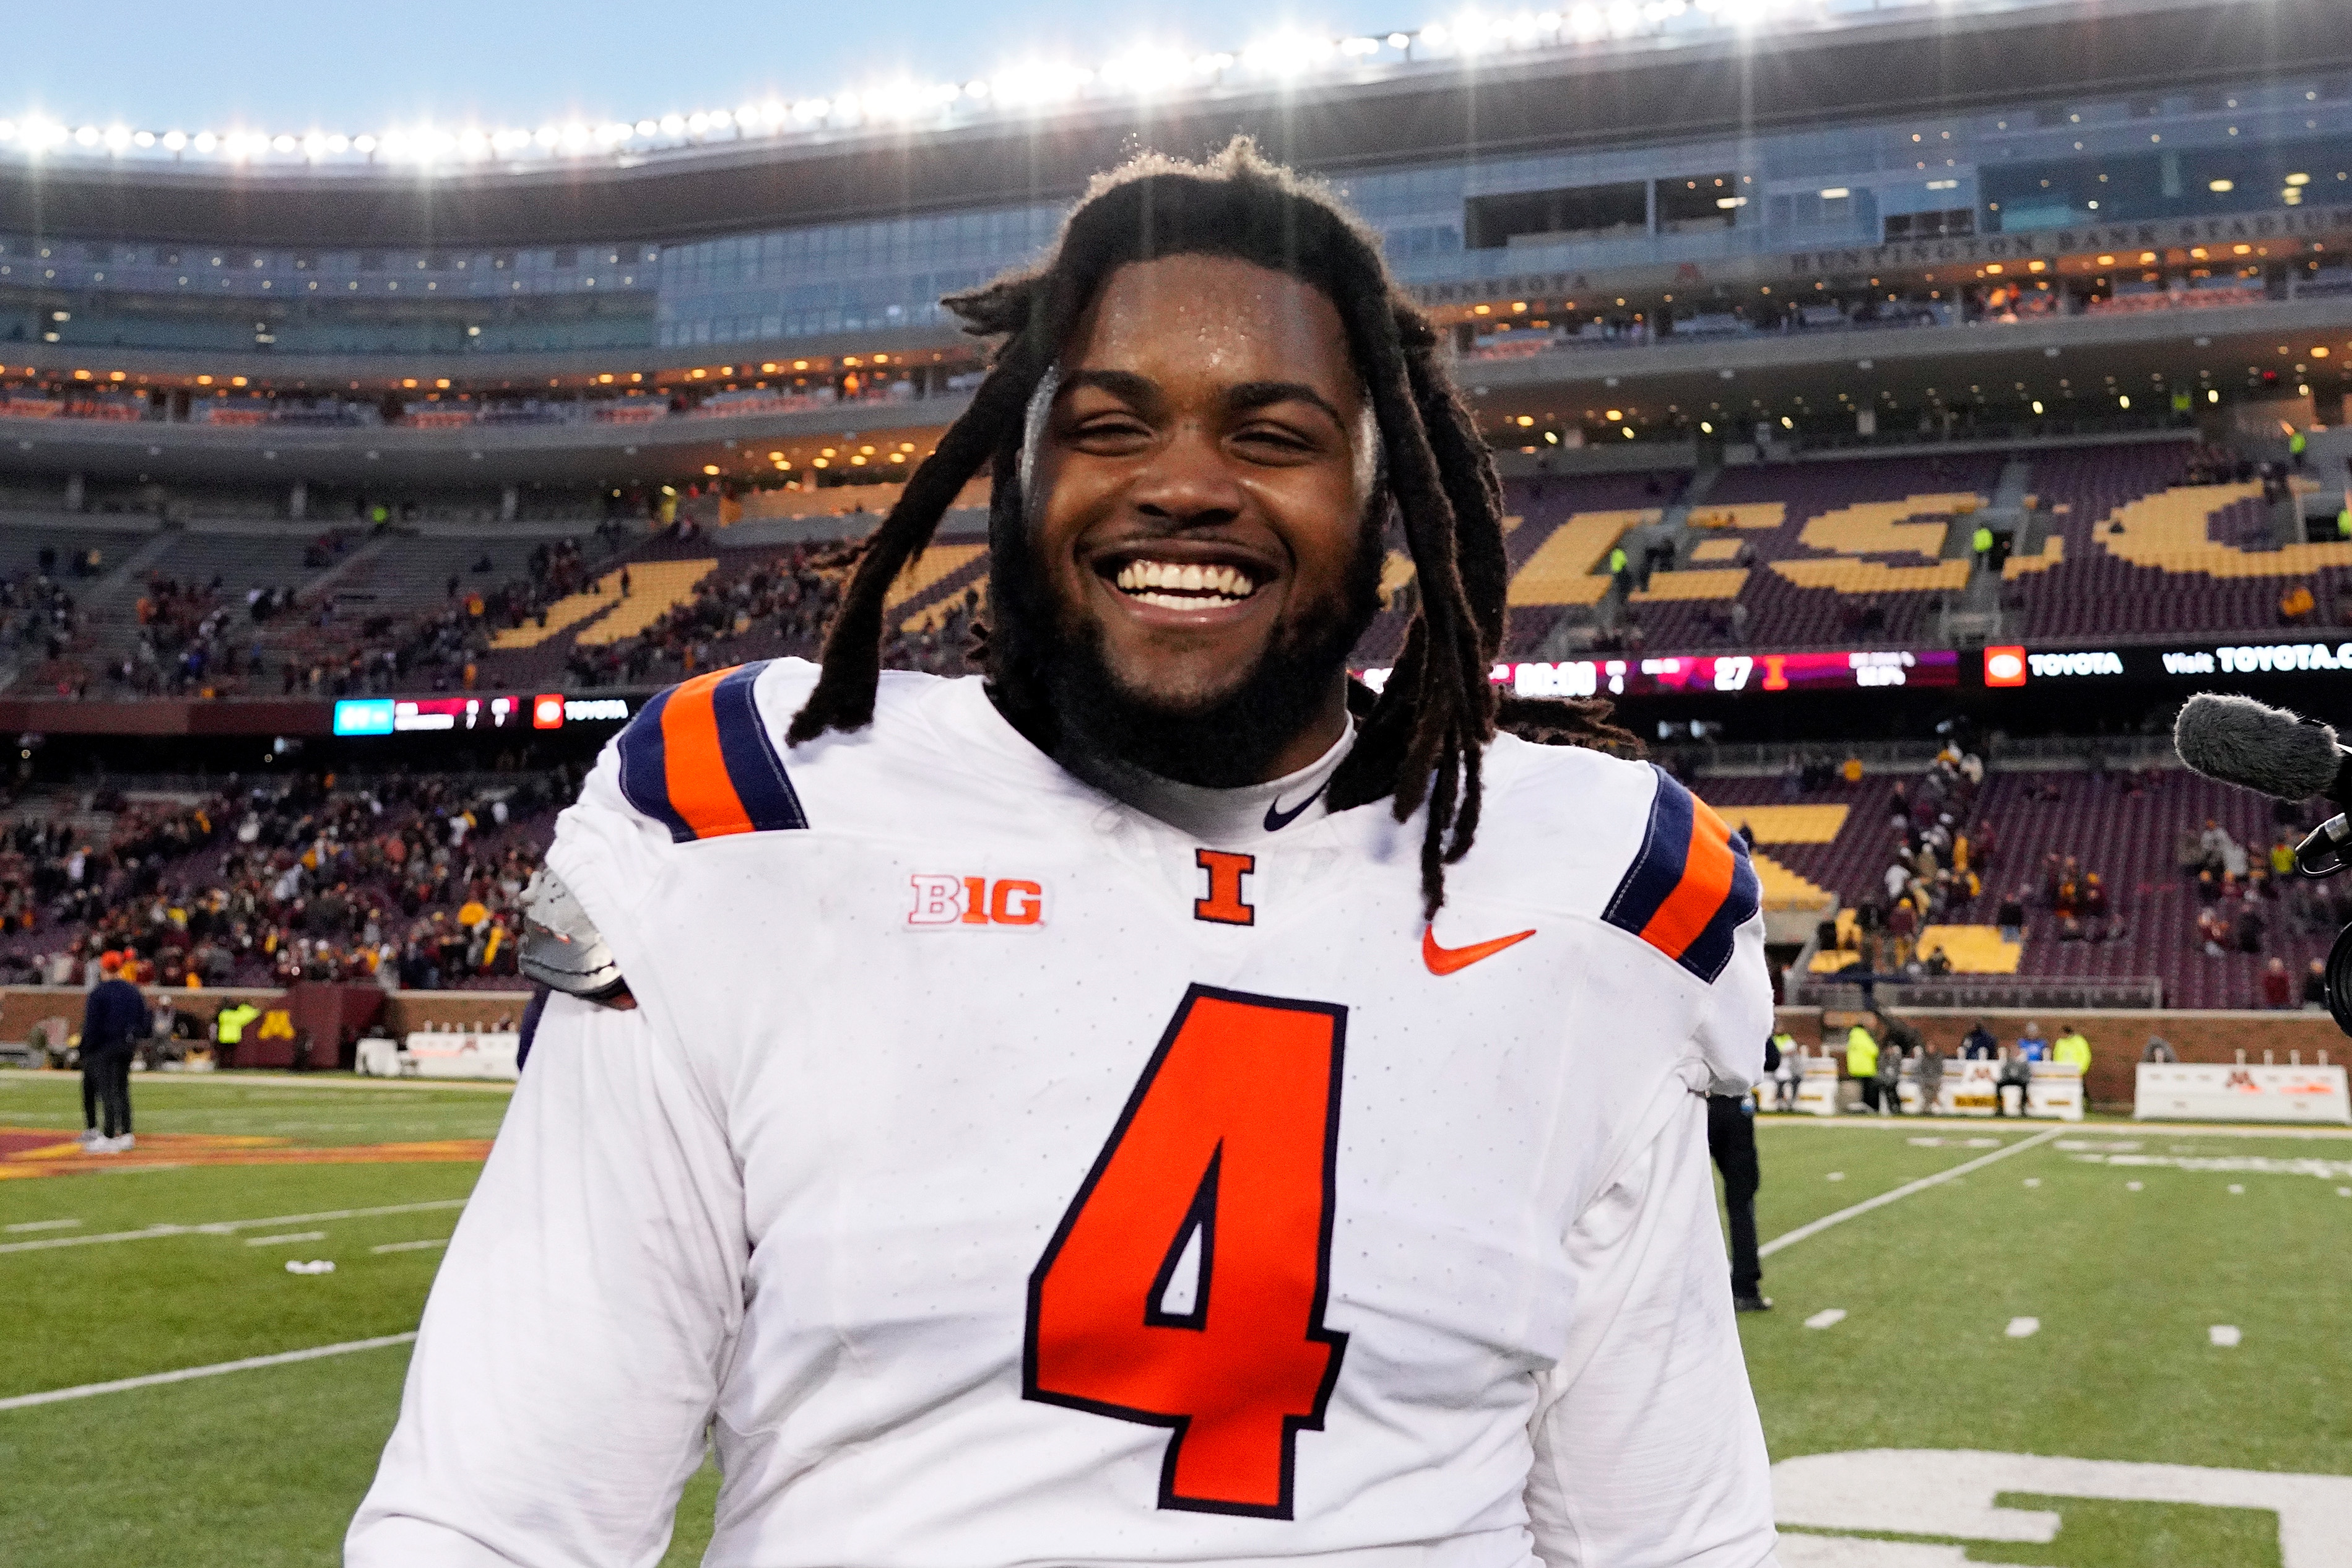 Smiling football player on field wearing an &quot;Illini&quot; jersey with the number 4, after a game